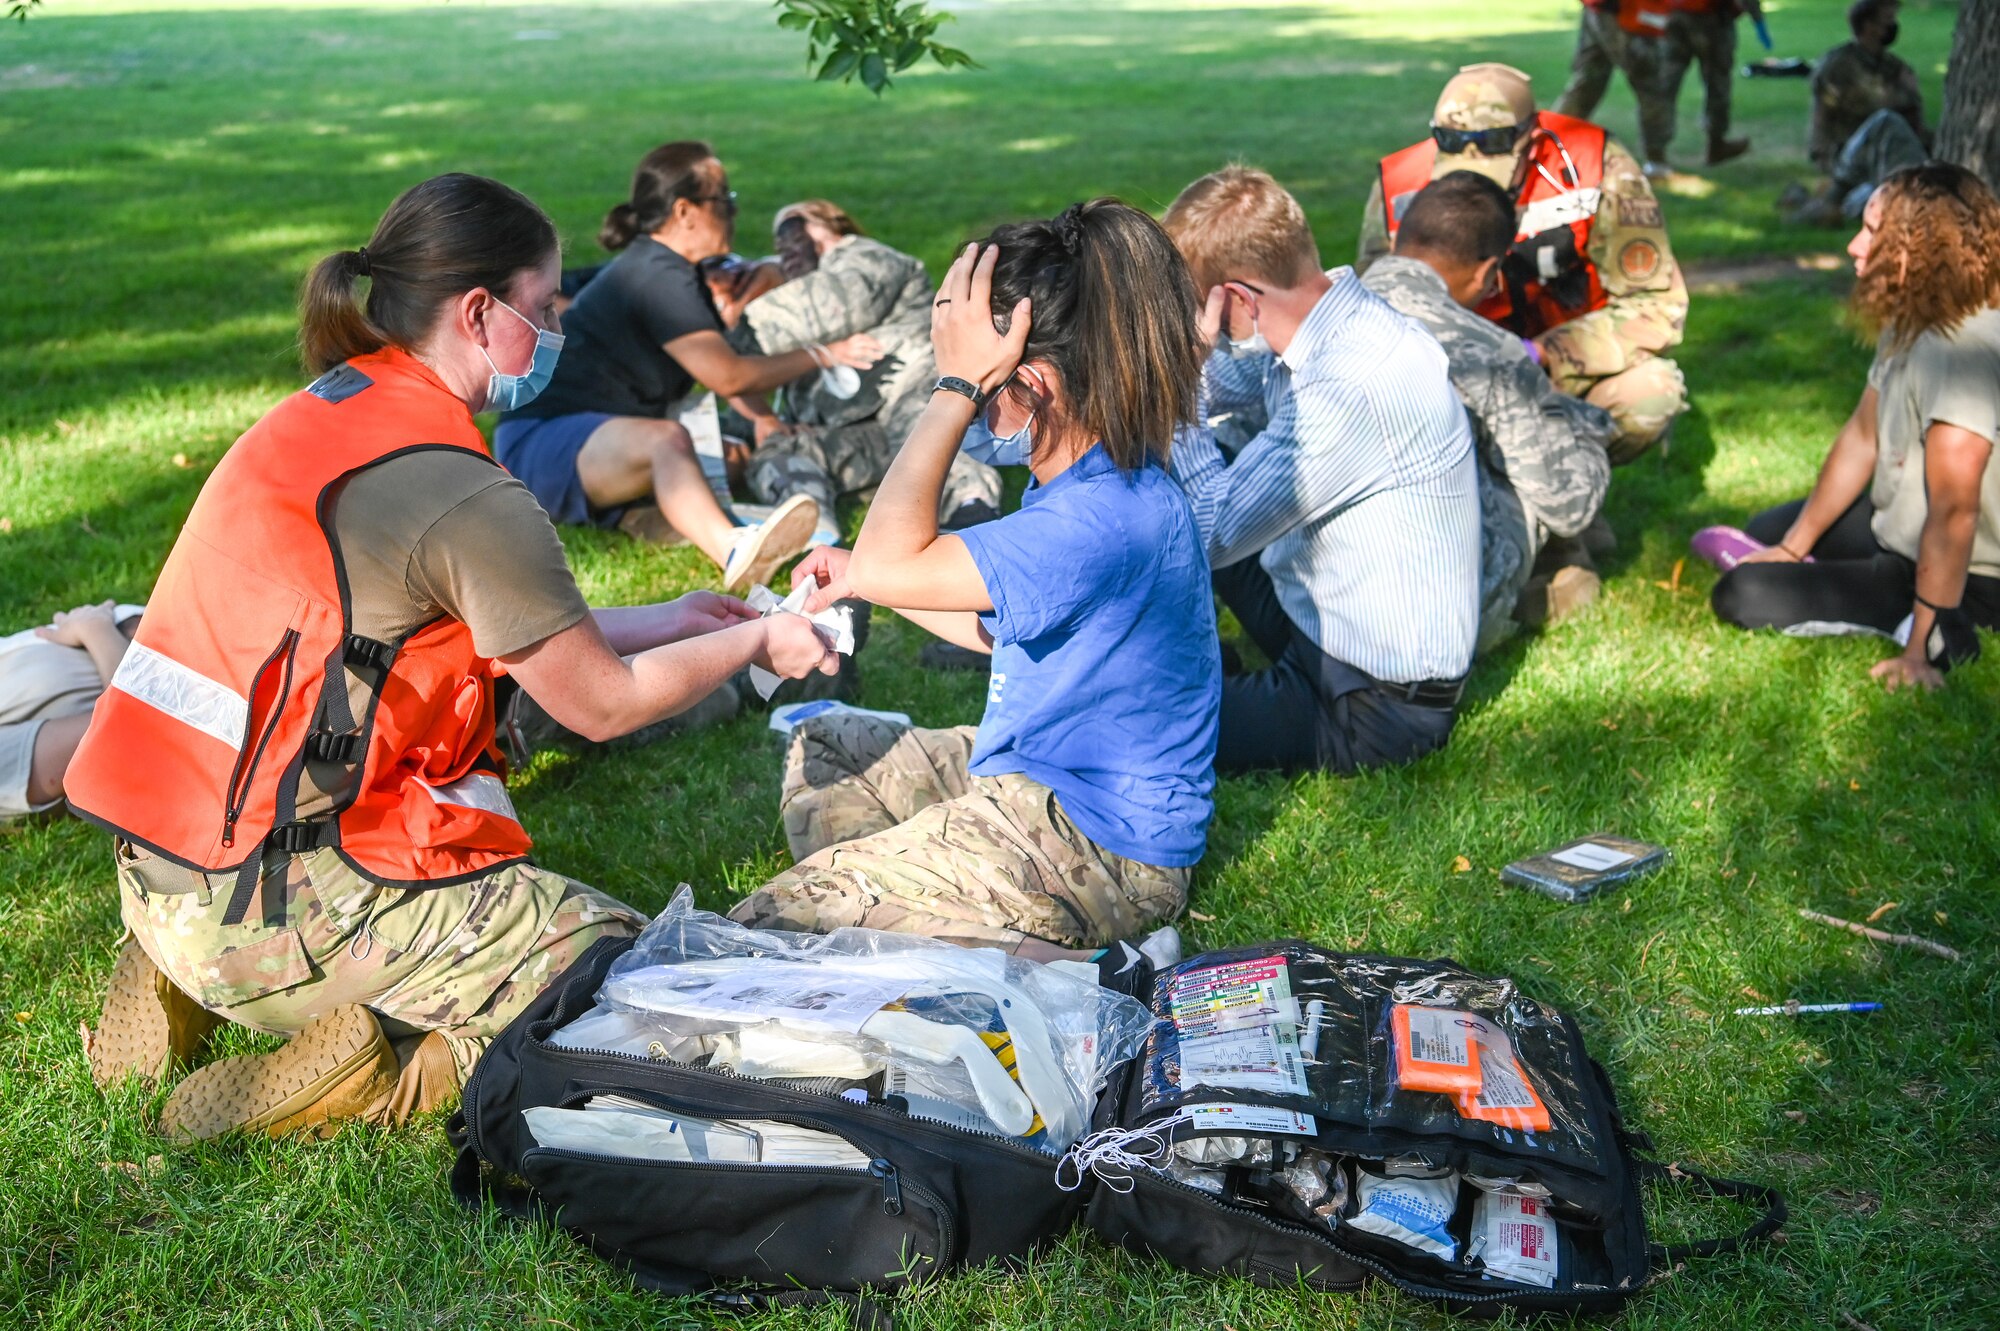 Ready Eagle, an Air Force Medical Readiness Agency directed medical readiness training and exercise program, tested 75th MDG on their response to a chemical, biological, radiological, nuclear, or explosive event.